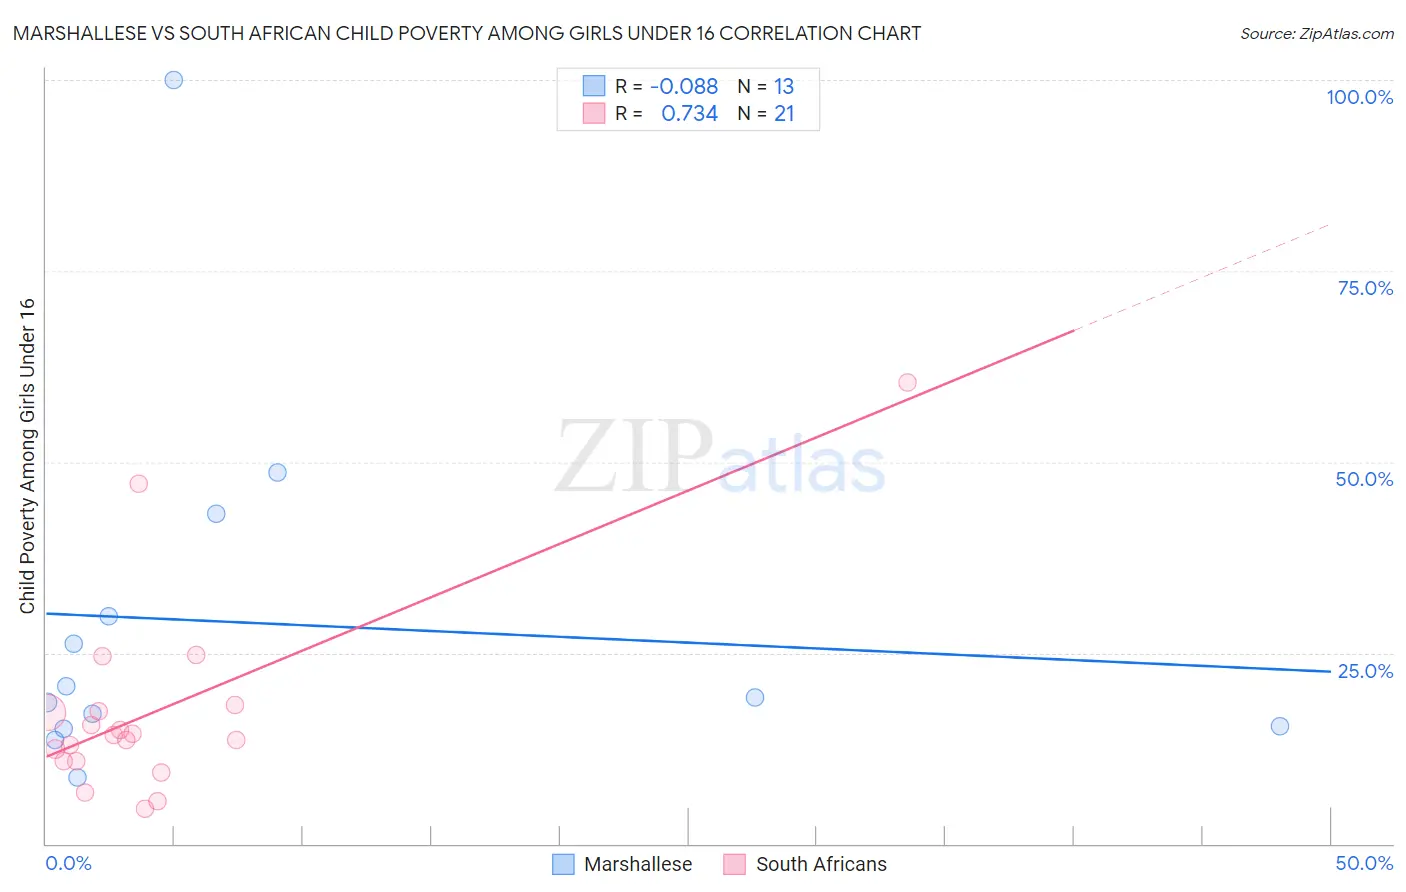 Marshallese vs South African Child Poverty Among Girls Under 16